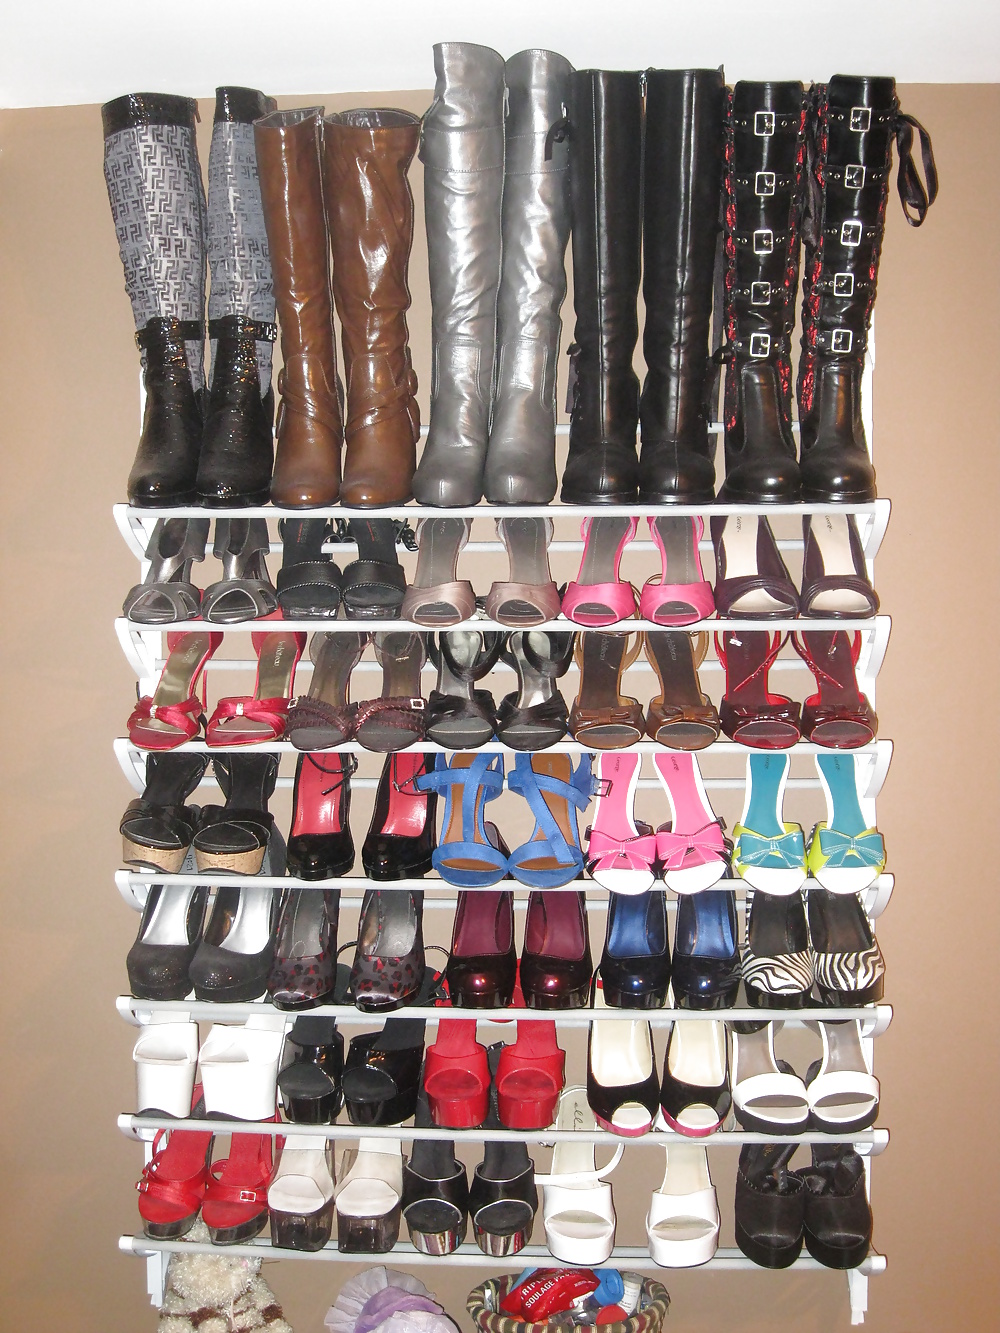 BBW boots and shoes collection